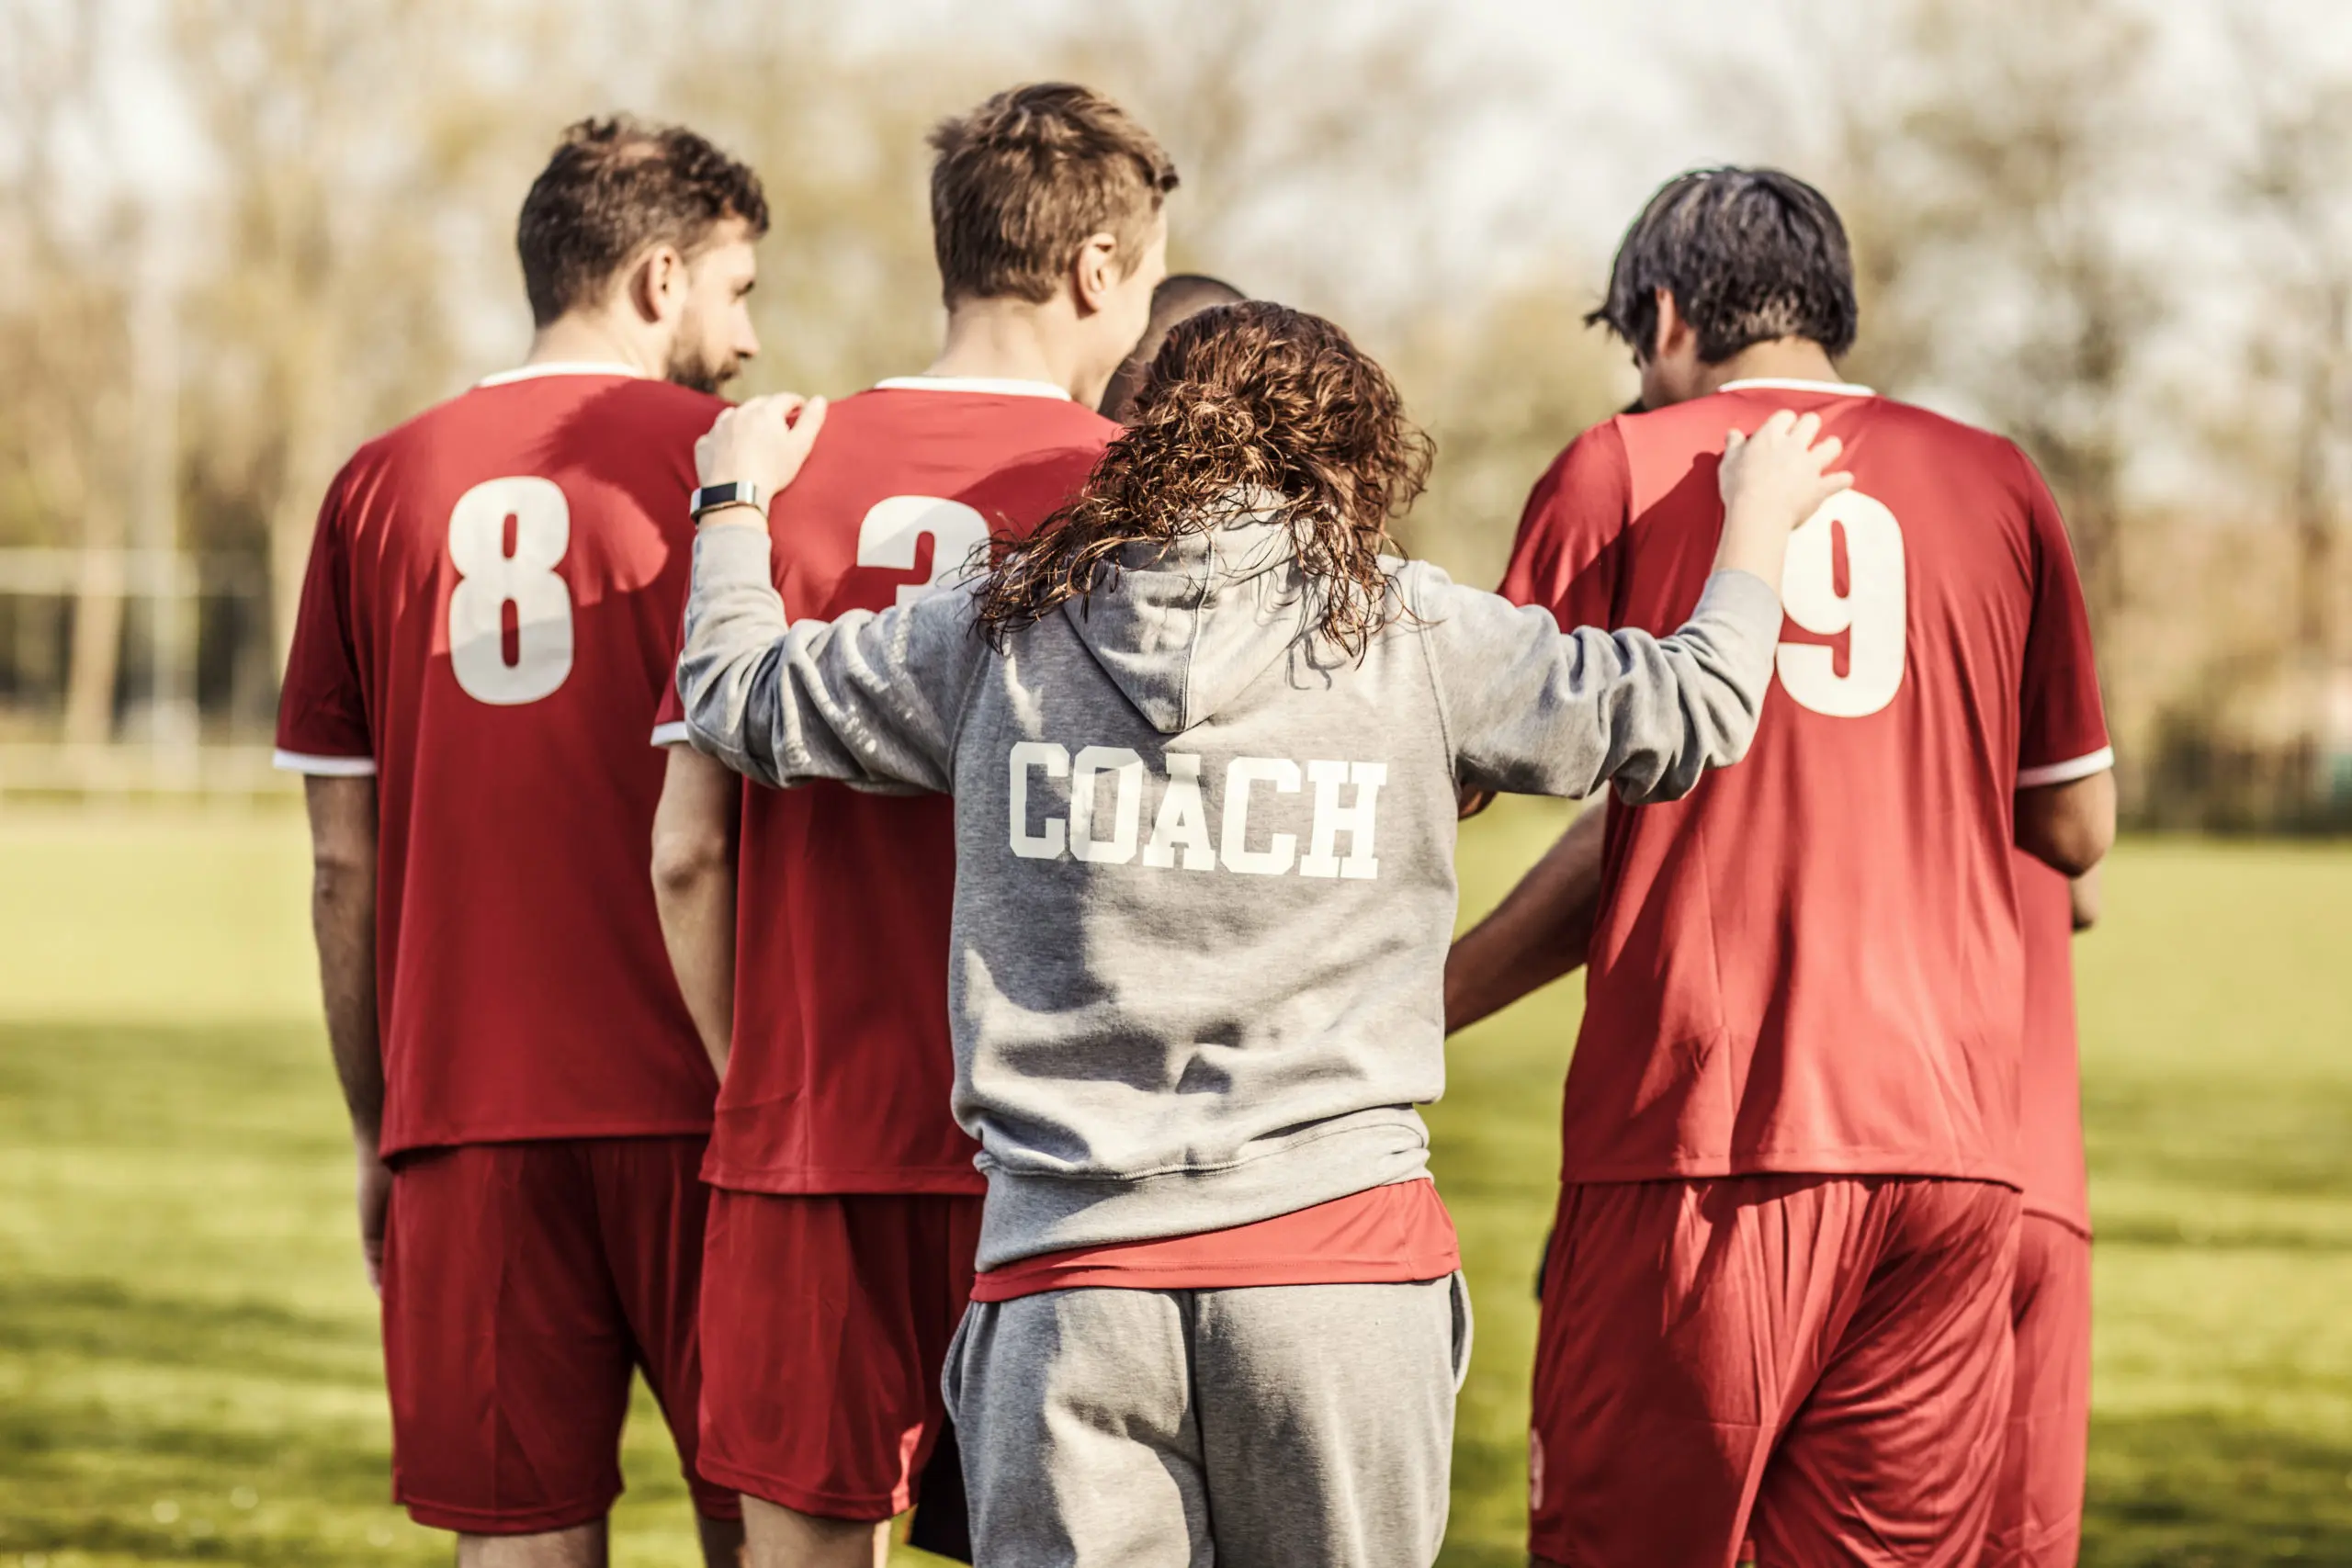 Featured image: How To Give The Most Valuable Experience To Your Youth Sports Club Members